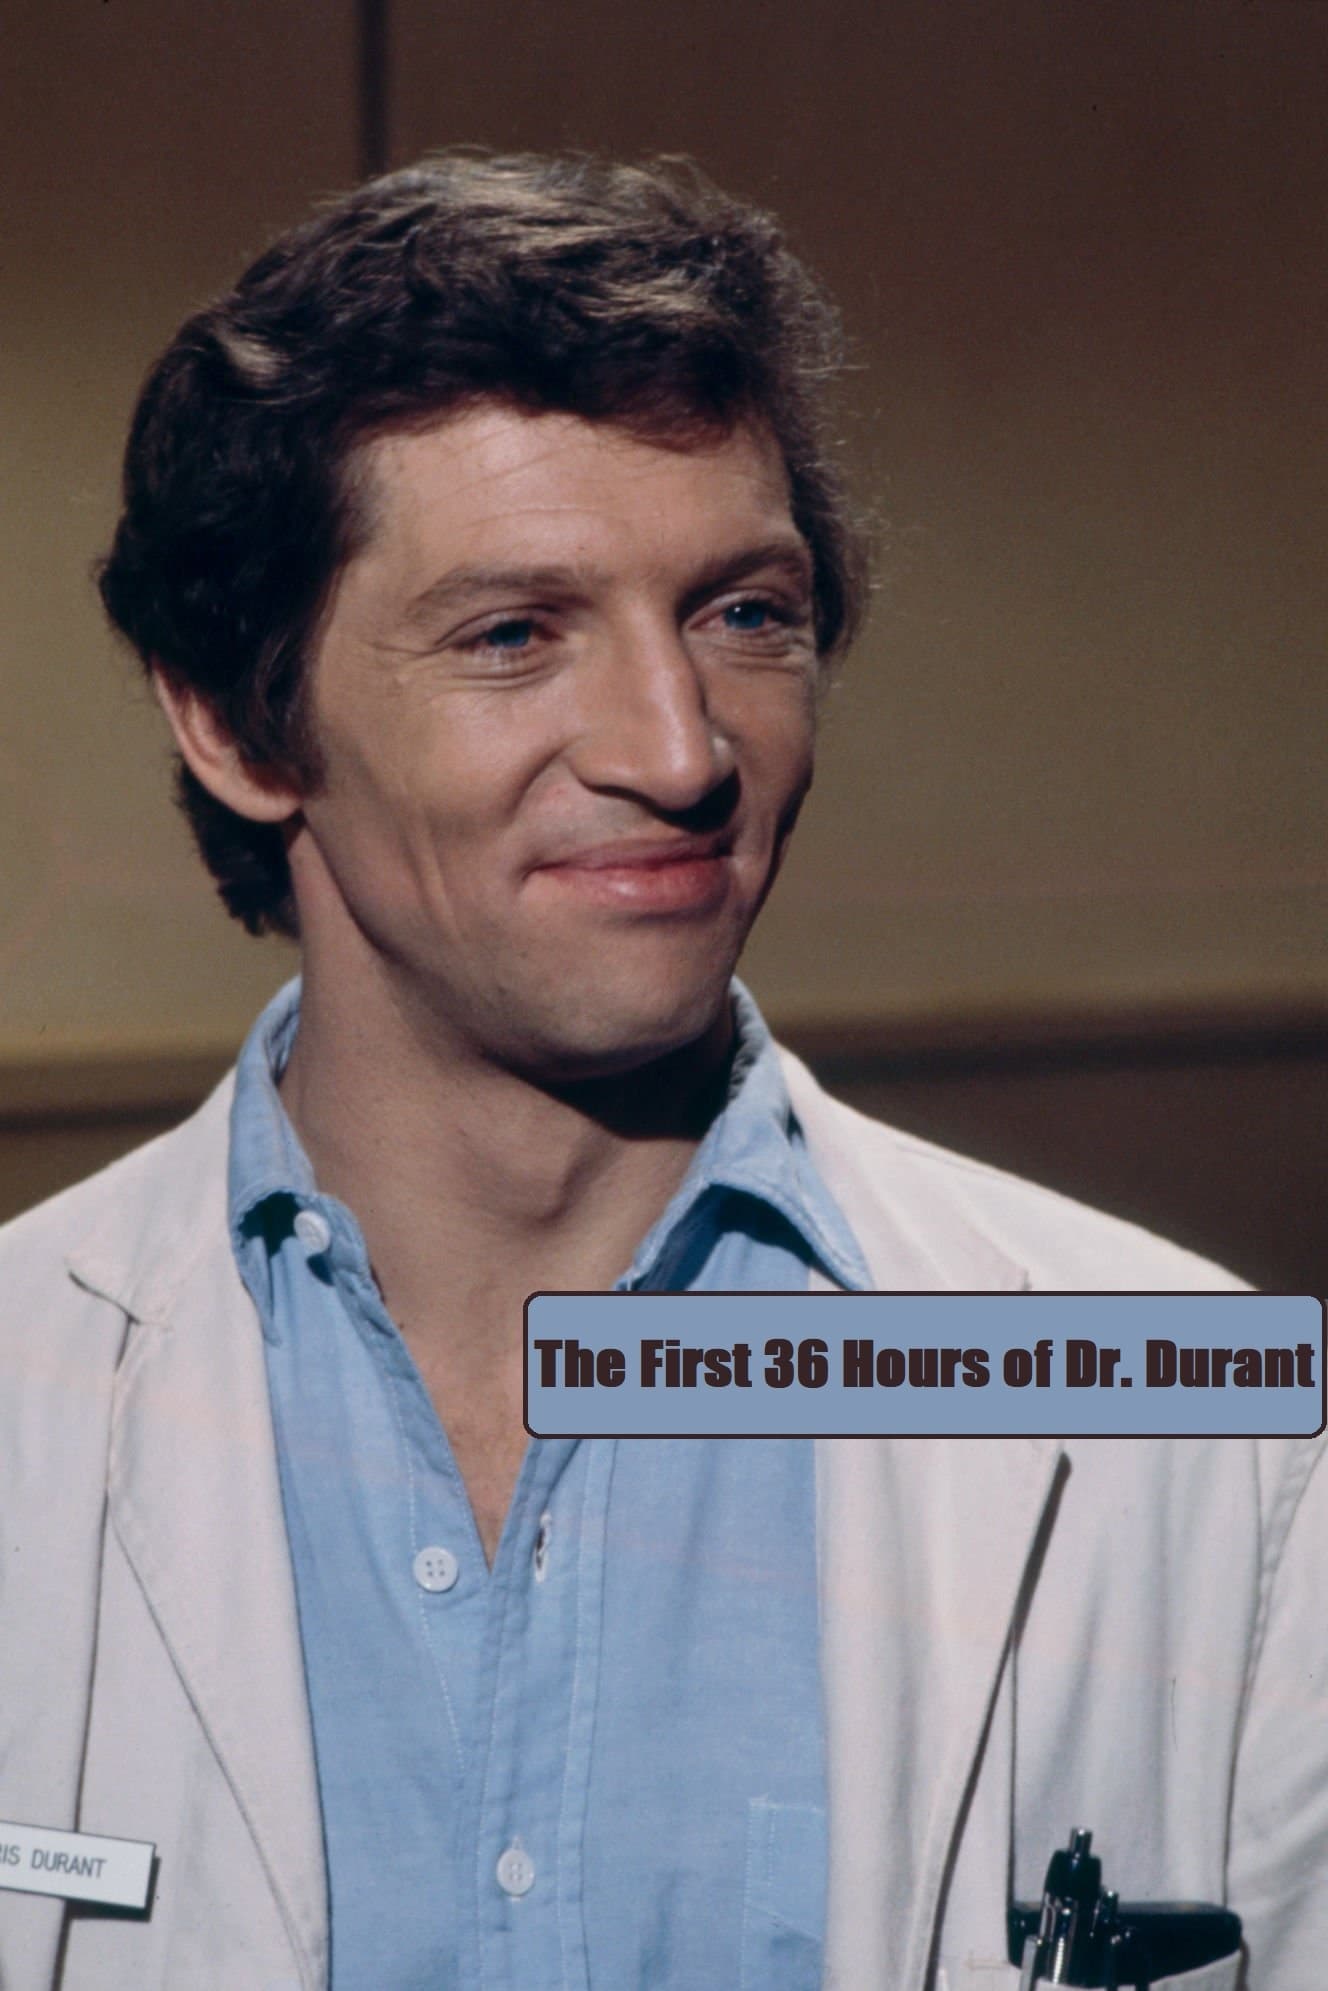 The First 36 Hours of Dr. Durant